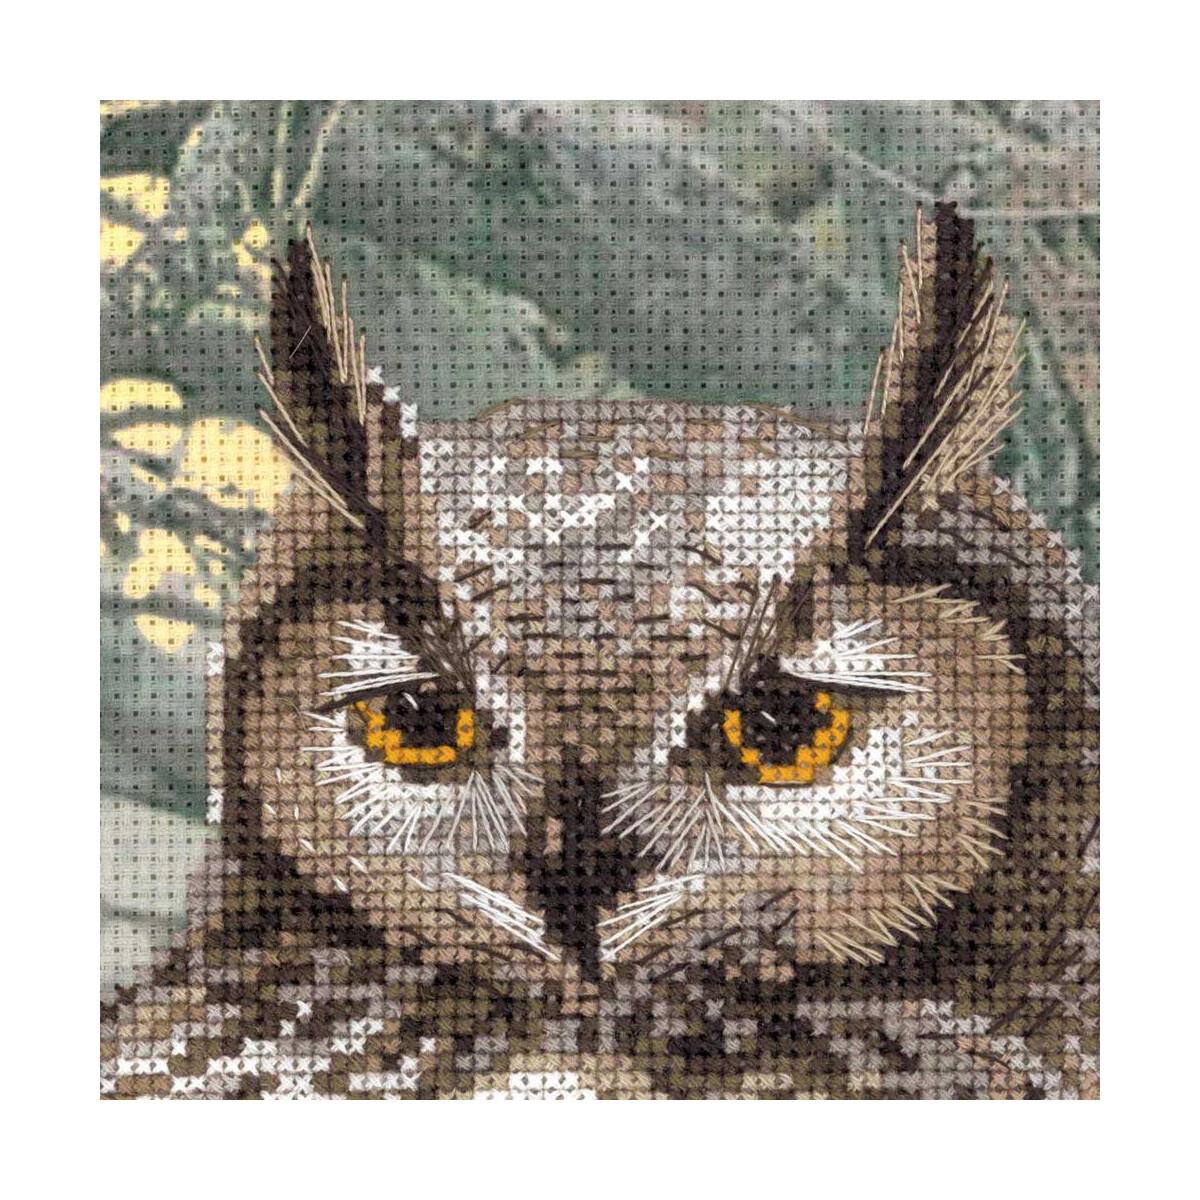 Eagle Owl counted cross stitch kit